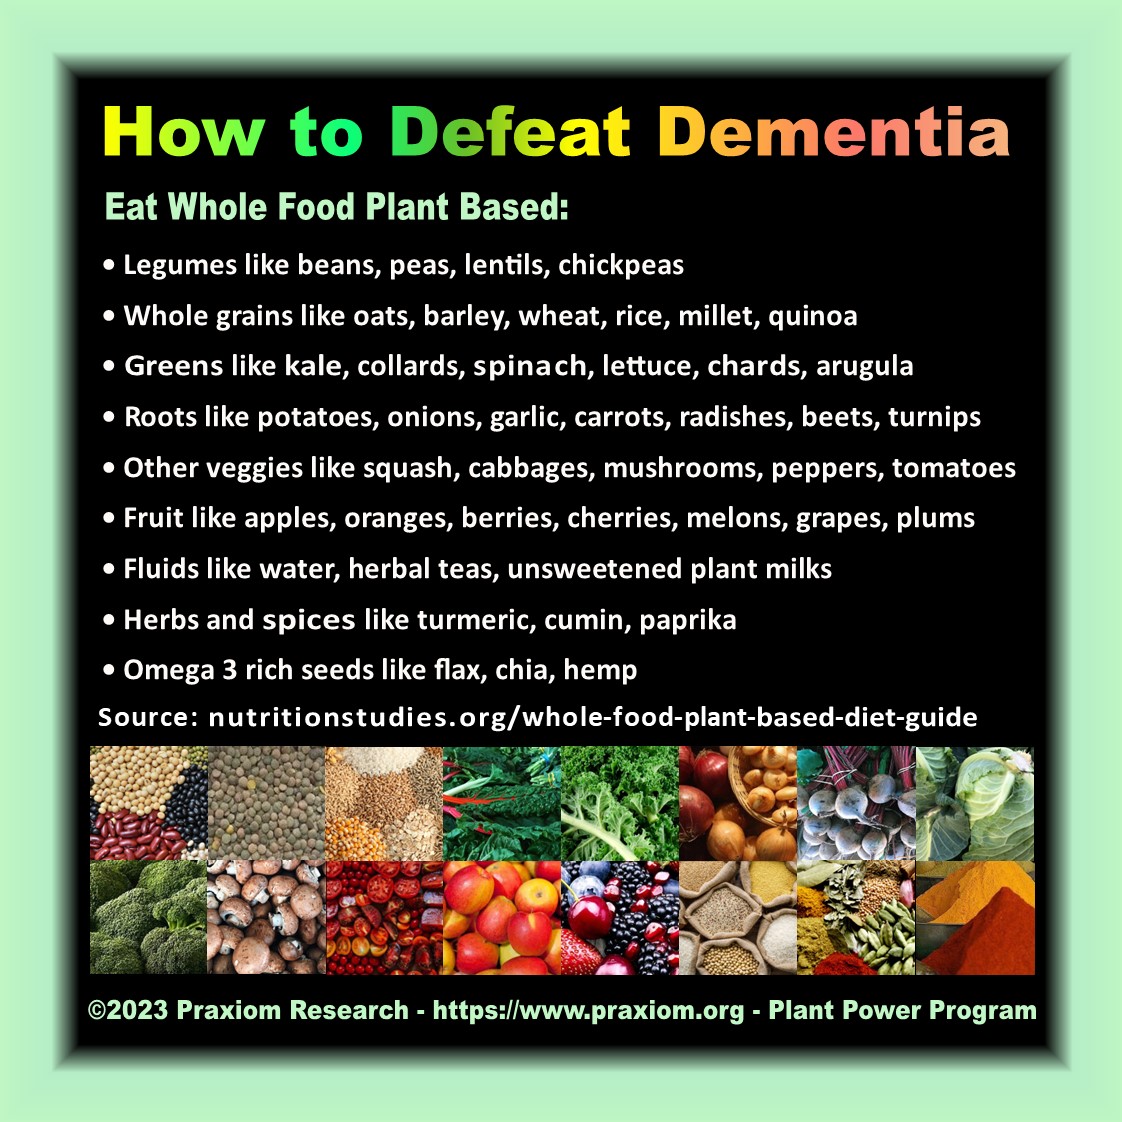 How to Defeat Dementia